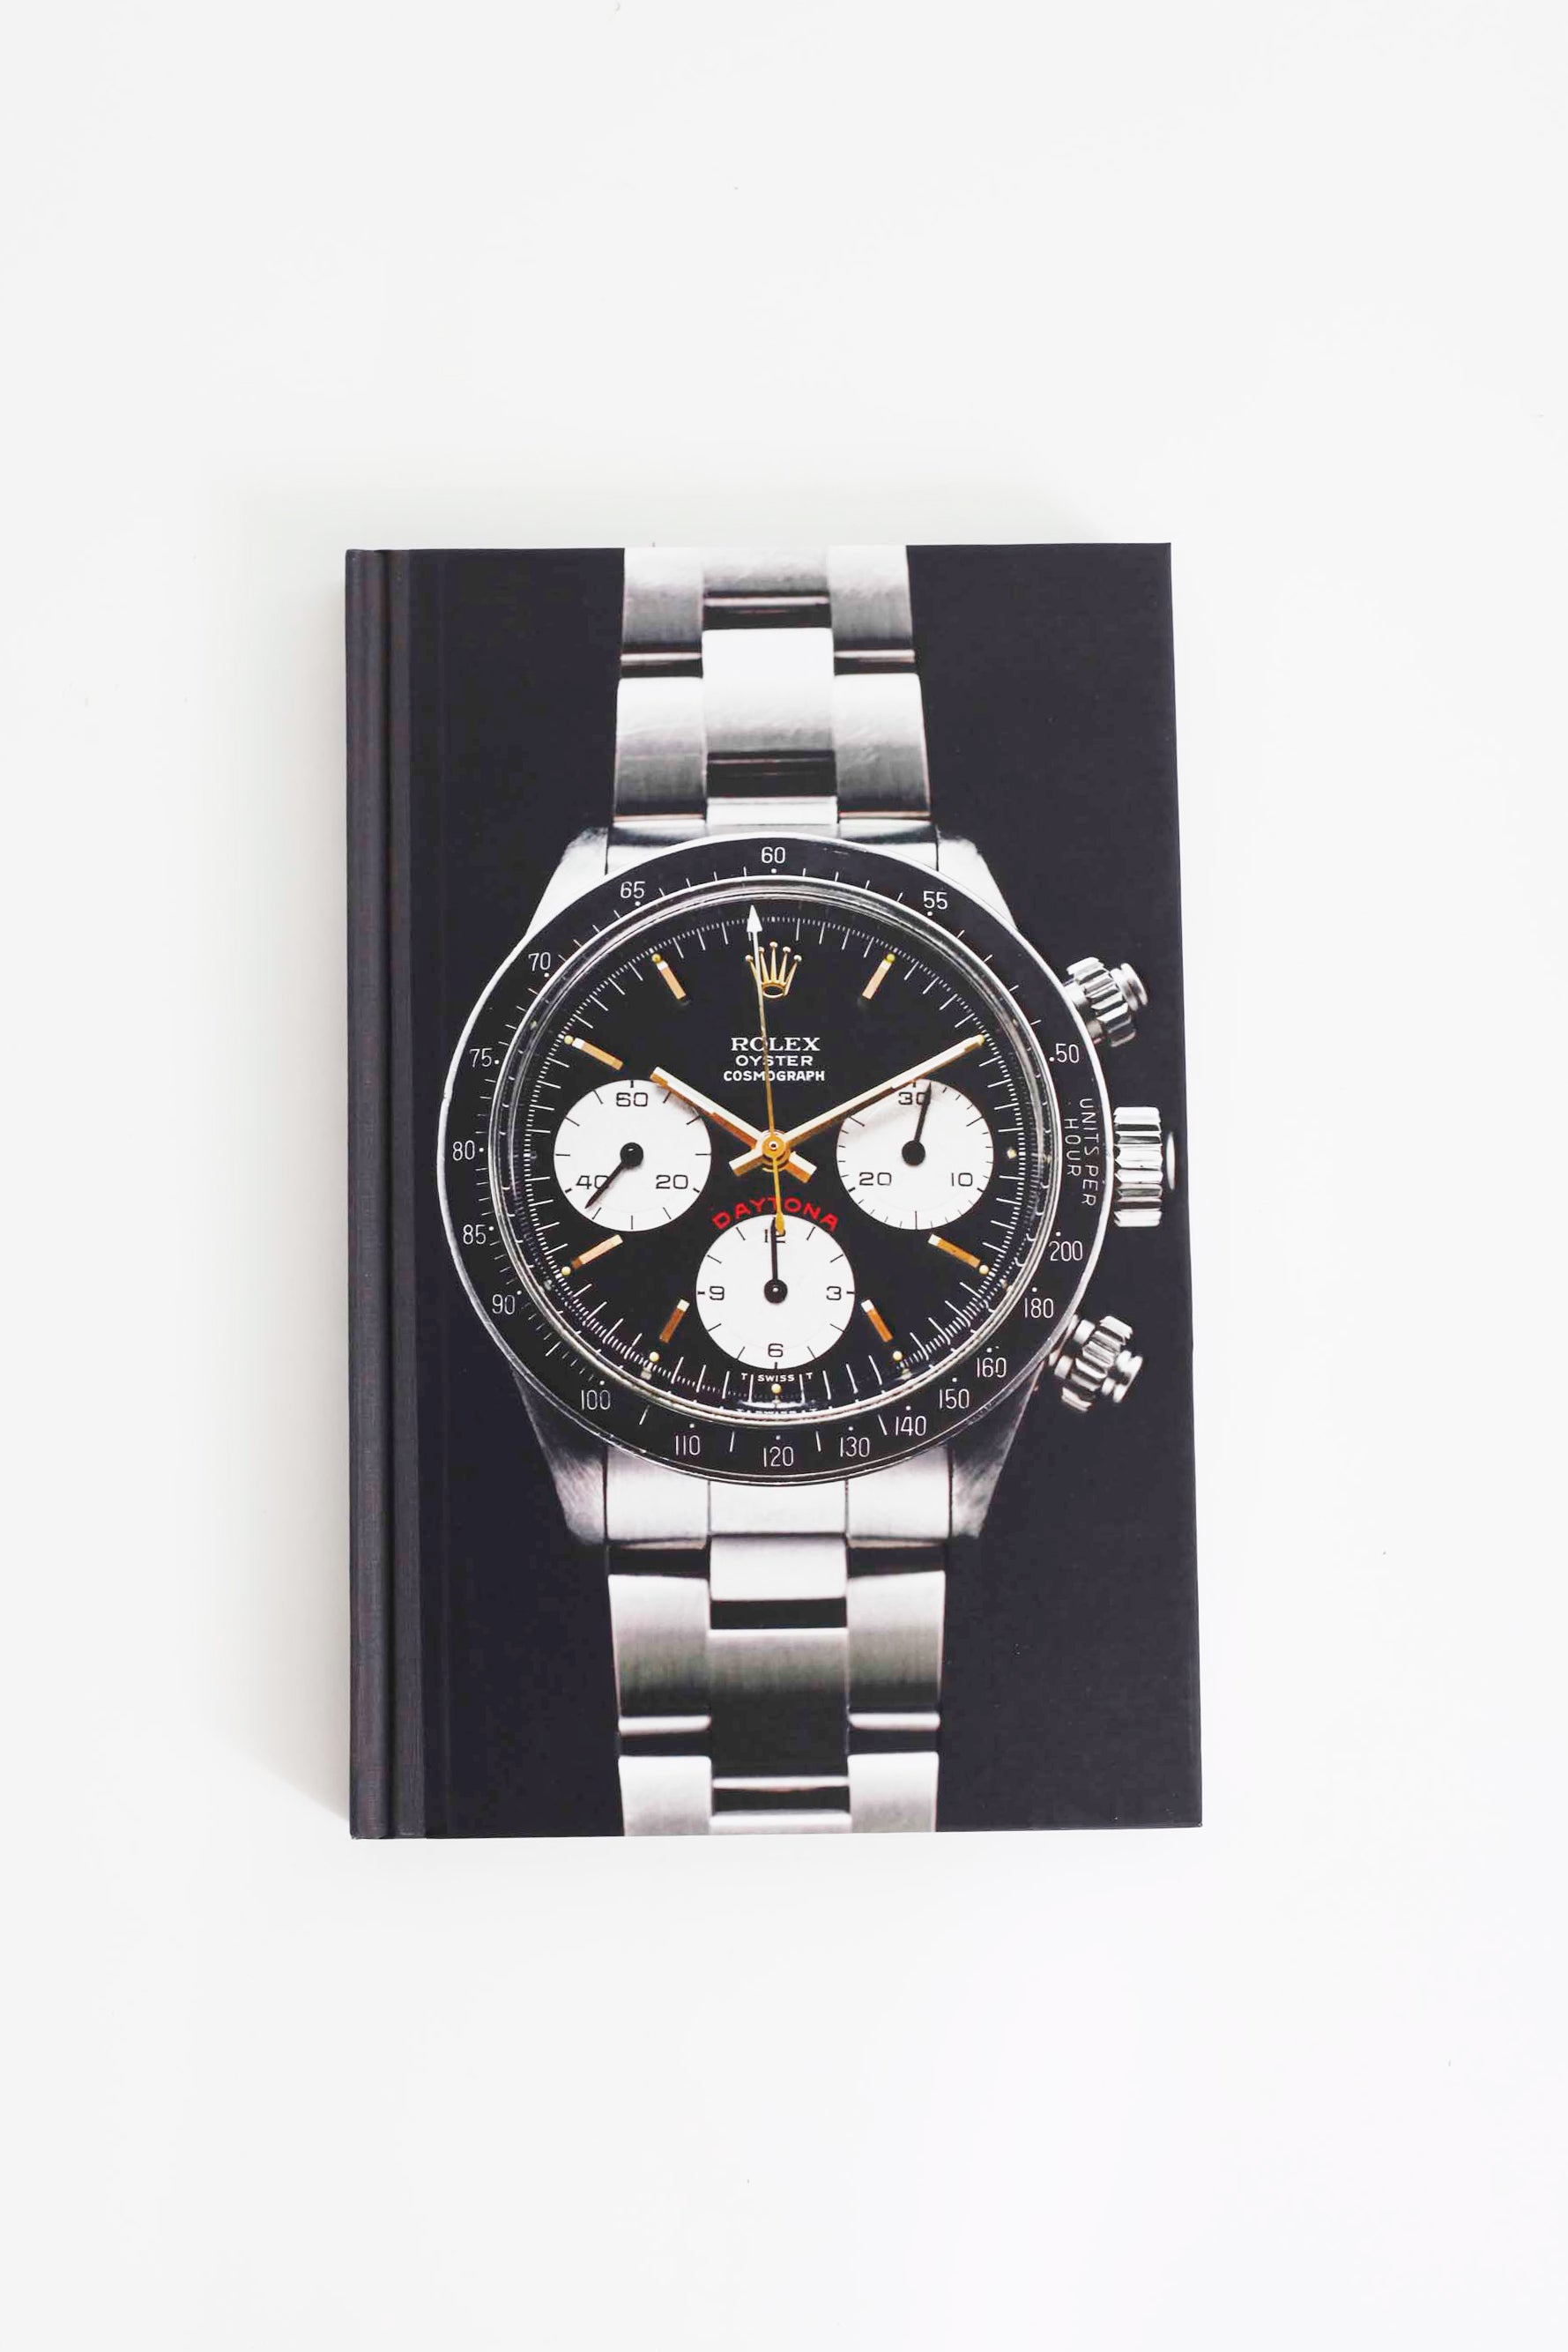 Luxury Watch Coffee Table Book